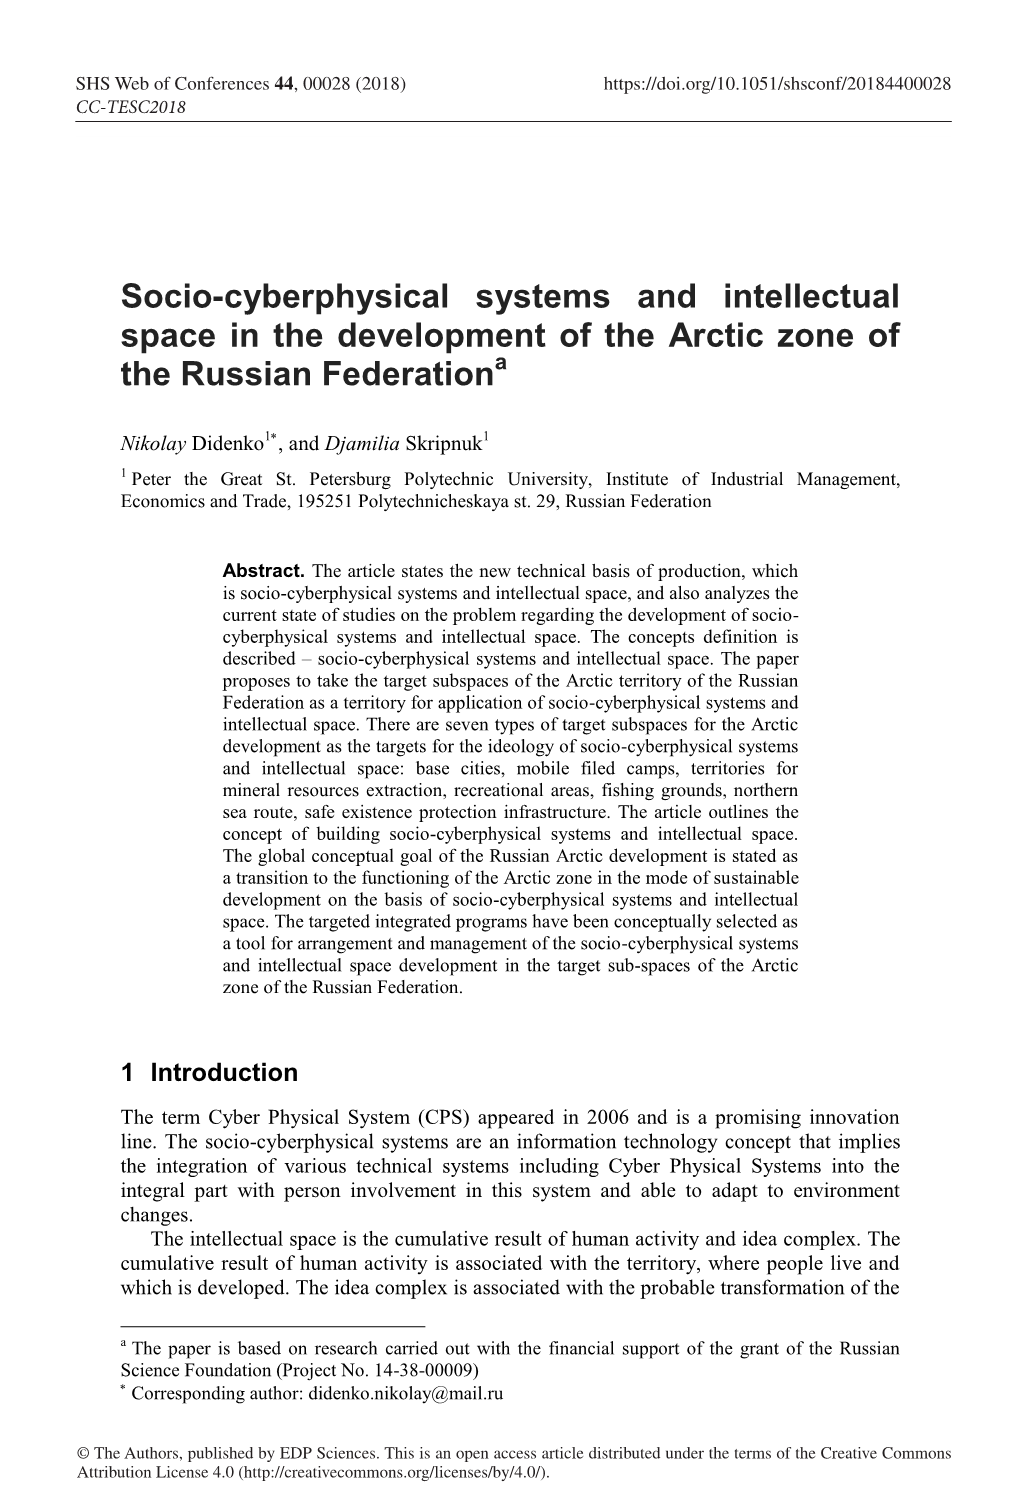 Socio-Cyberphysical Systems and Intellectual Space in the Development of the Arctic Zone of the Russian Federationa